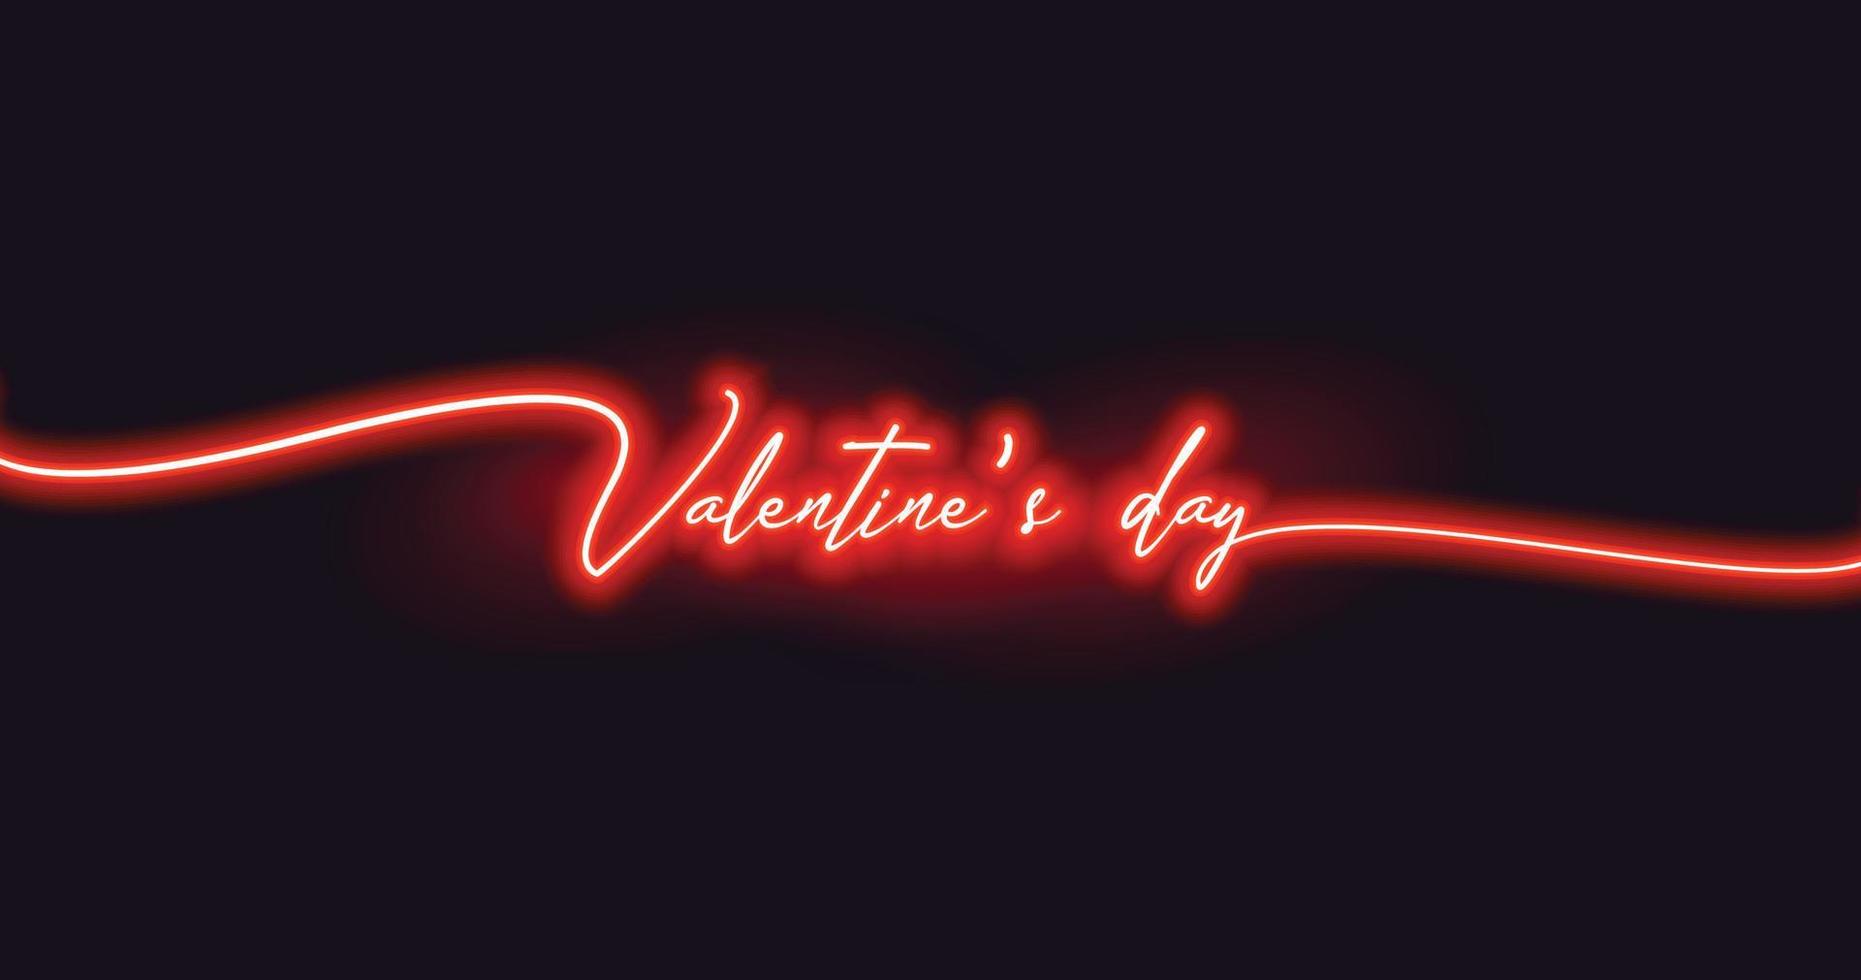 Valentines day text in red neon style vector